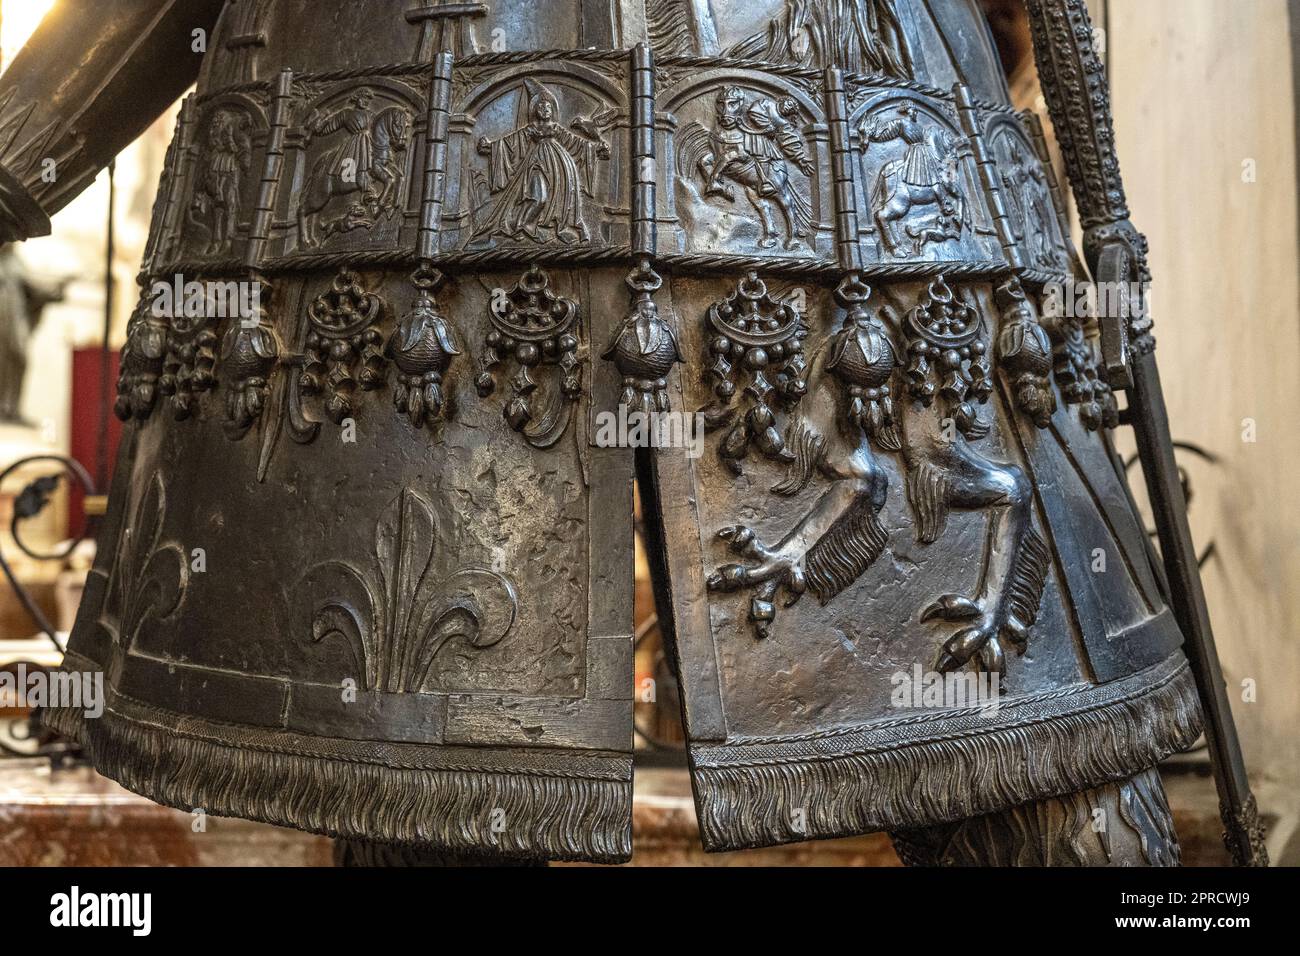 Decorative skirt or tunic of Philip the Good showing the fashion of the 15th century among the royality. Stock Photo